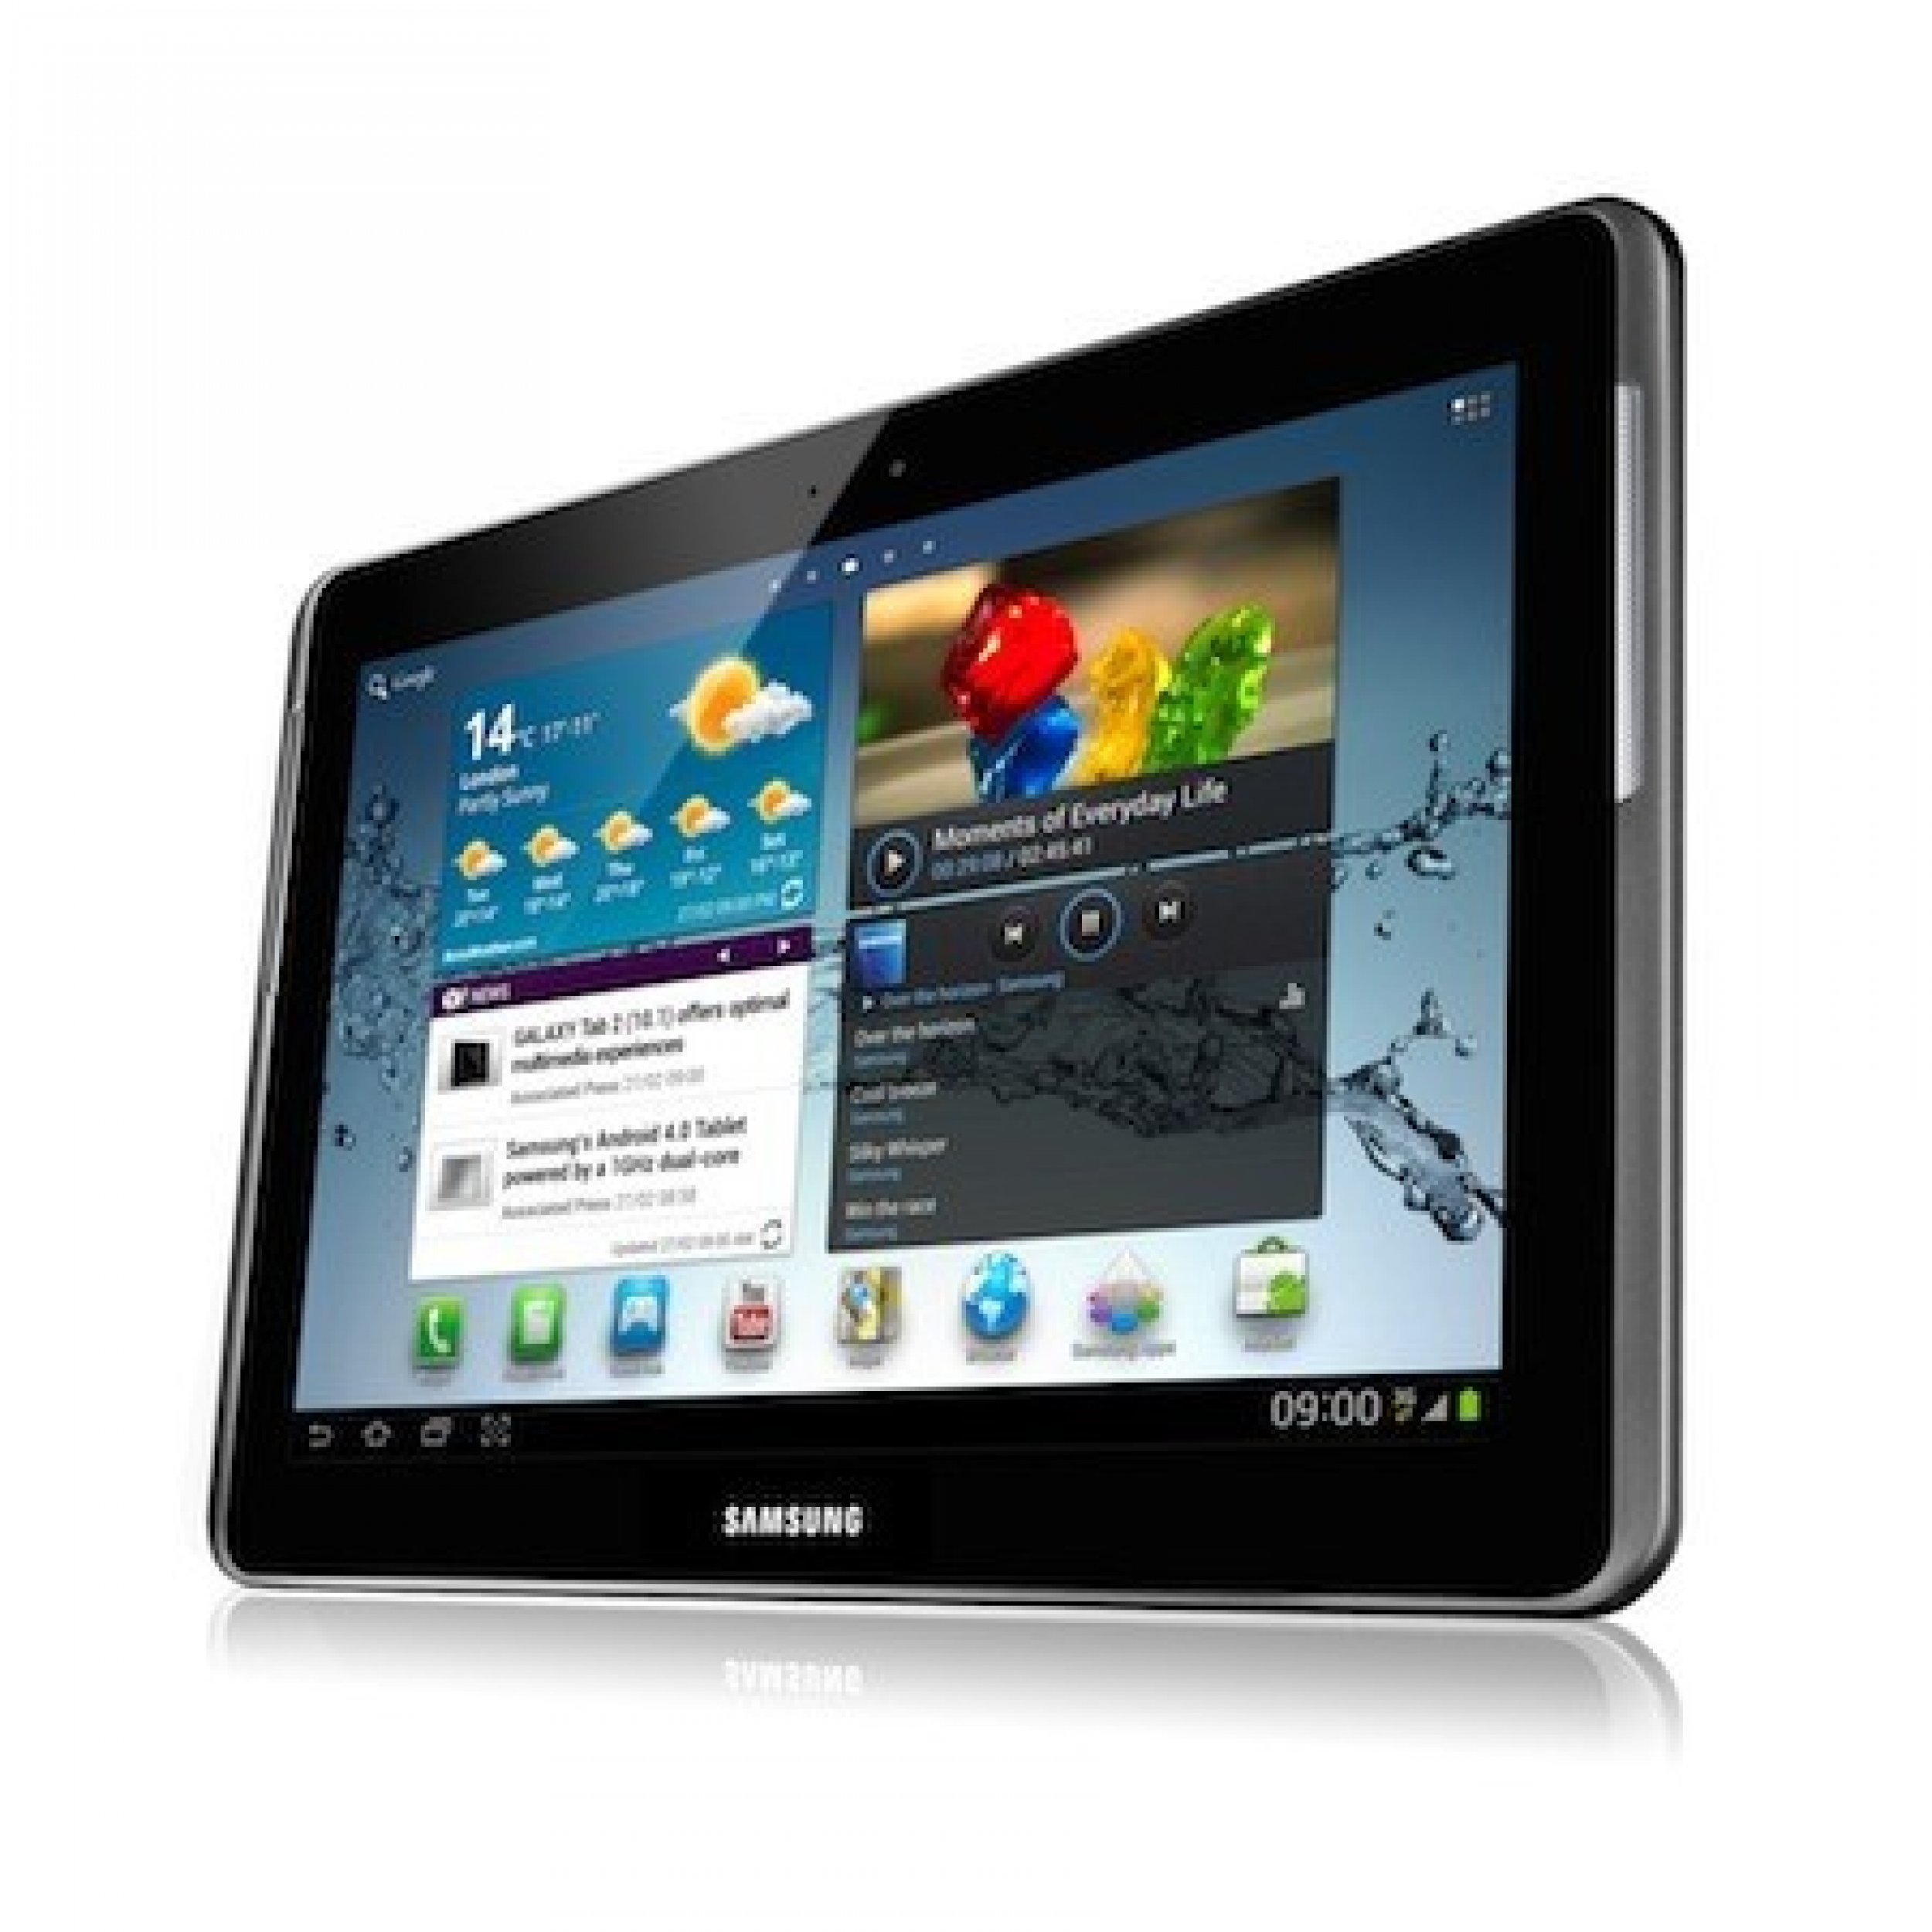 399 Samsung039s Galaxy Tab 2 10.1 vs Apples iPads Price Fight Get Fiercer As the Tablets Face-Off